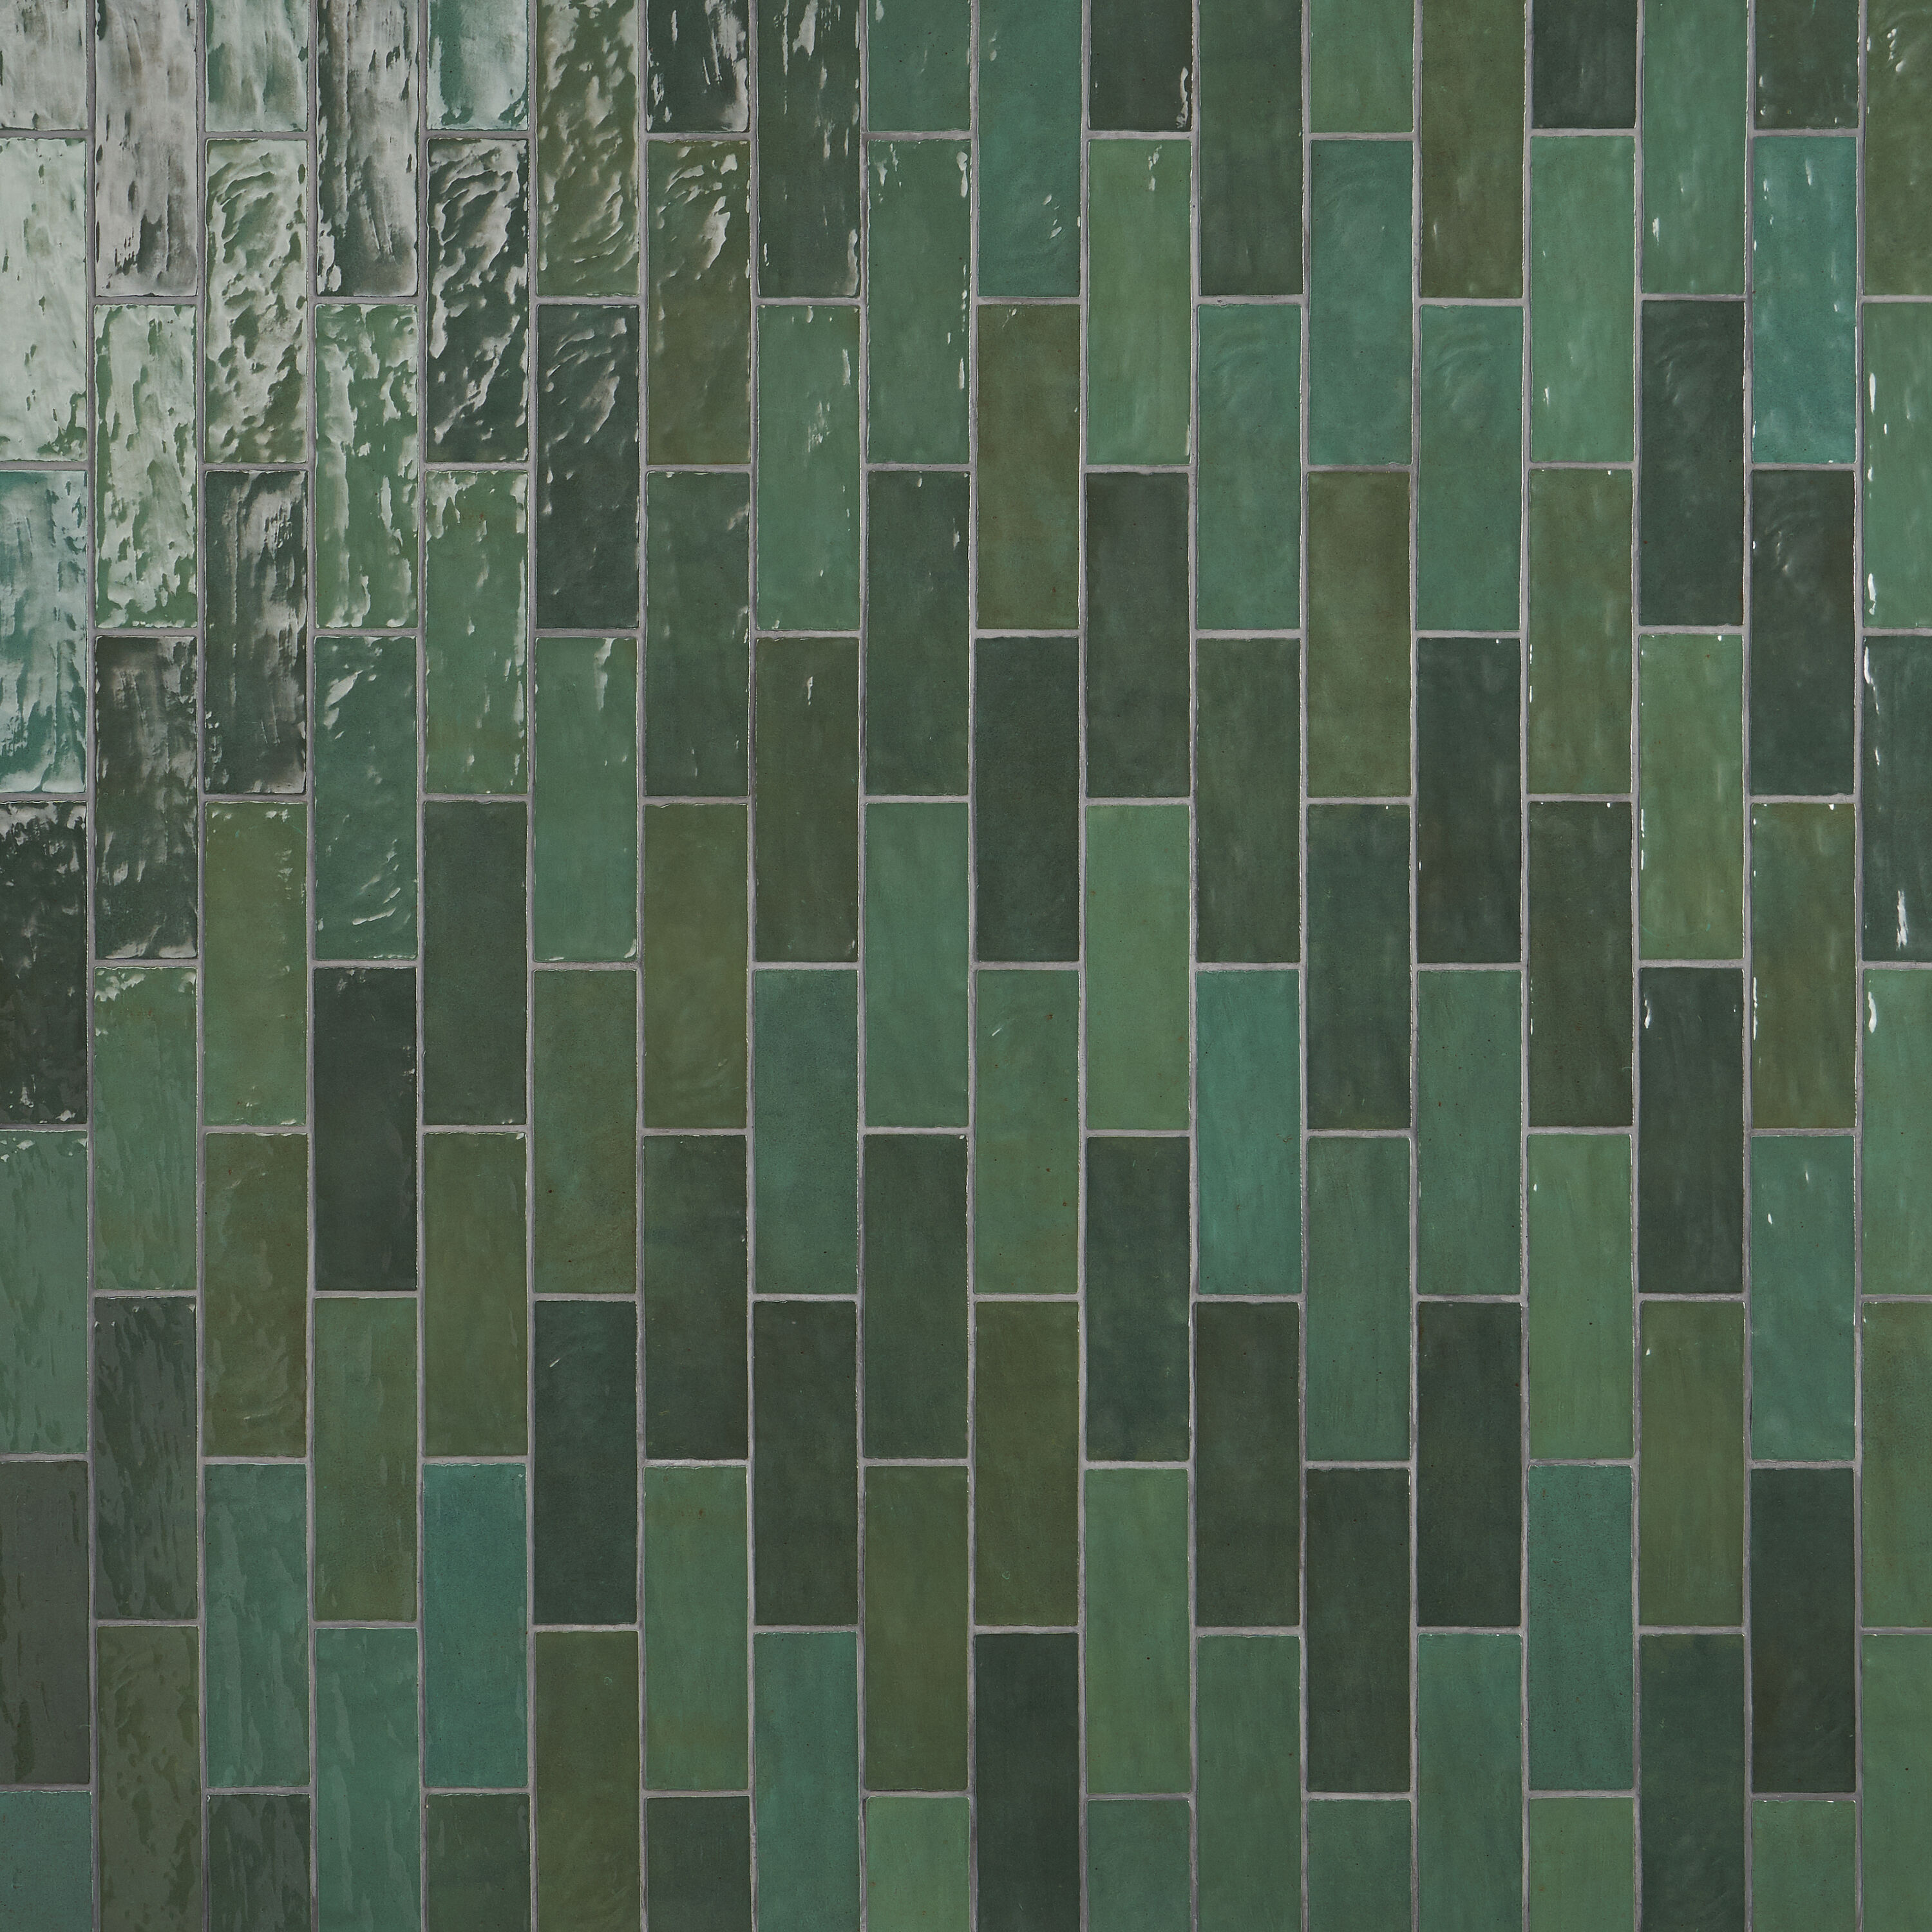 Mosaic Tiles, Watery Green Ceramic Tiles for Mosaic Making, Mosaic Tiles  for Crafts 